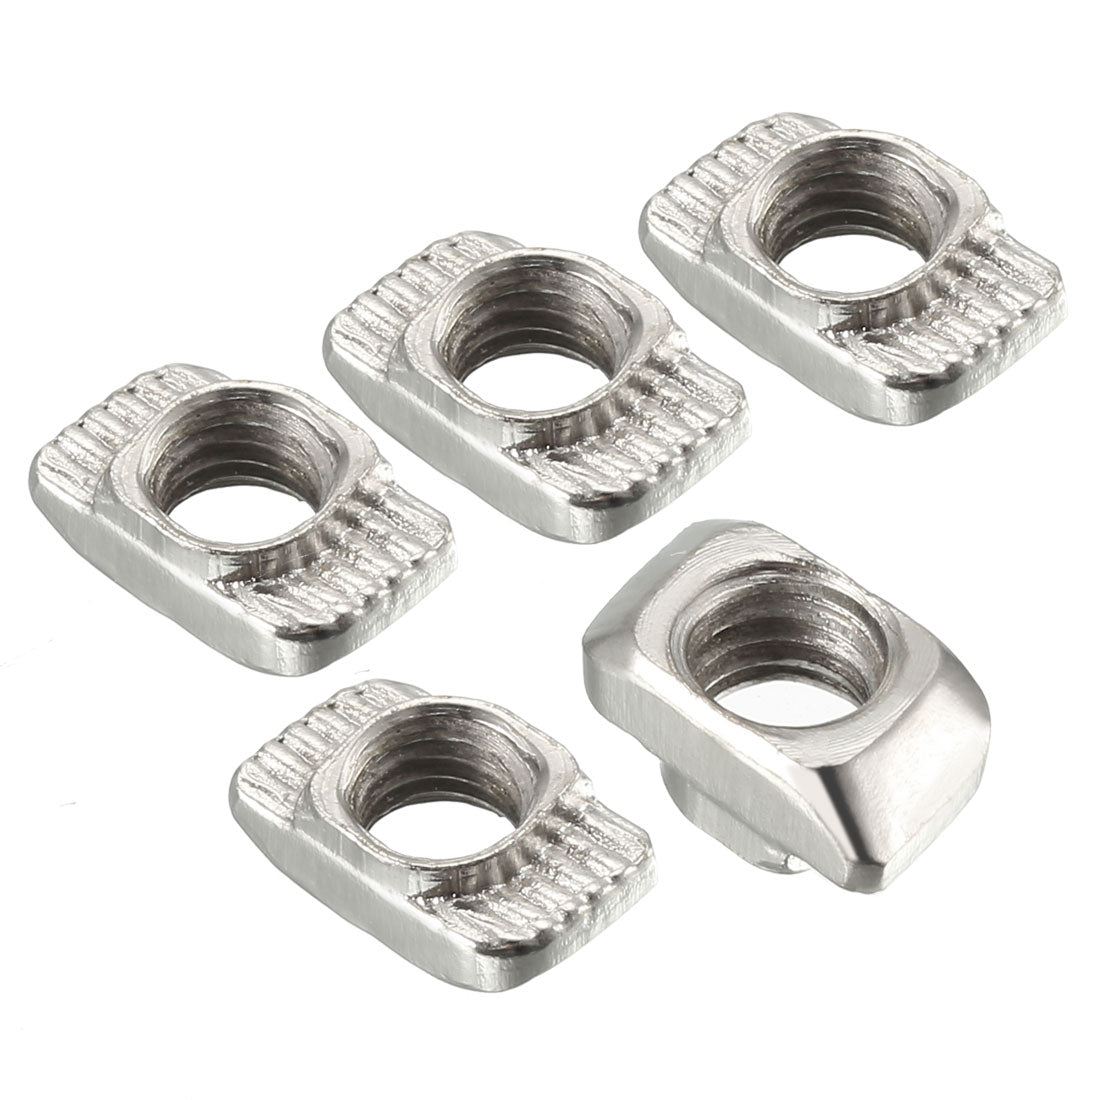 Uxcell Uxcell Sliding T Slot Nuts, M4 Thread for 2020 Series Aluminum Extrusion Profile 50pcs